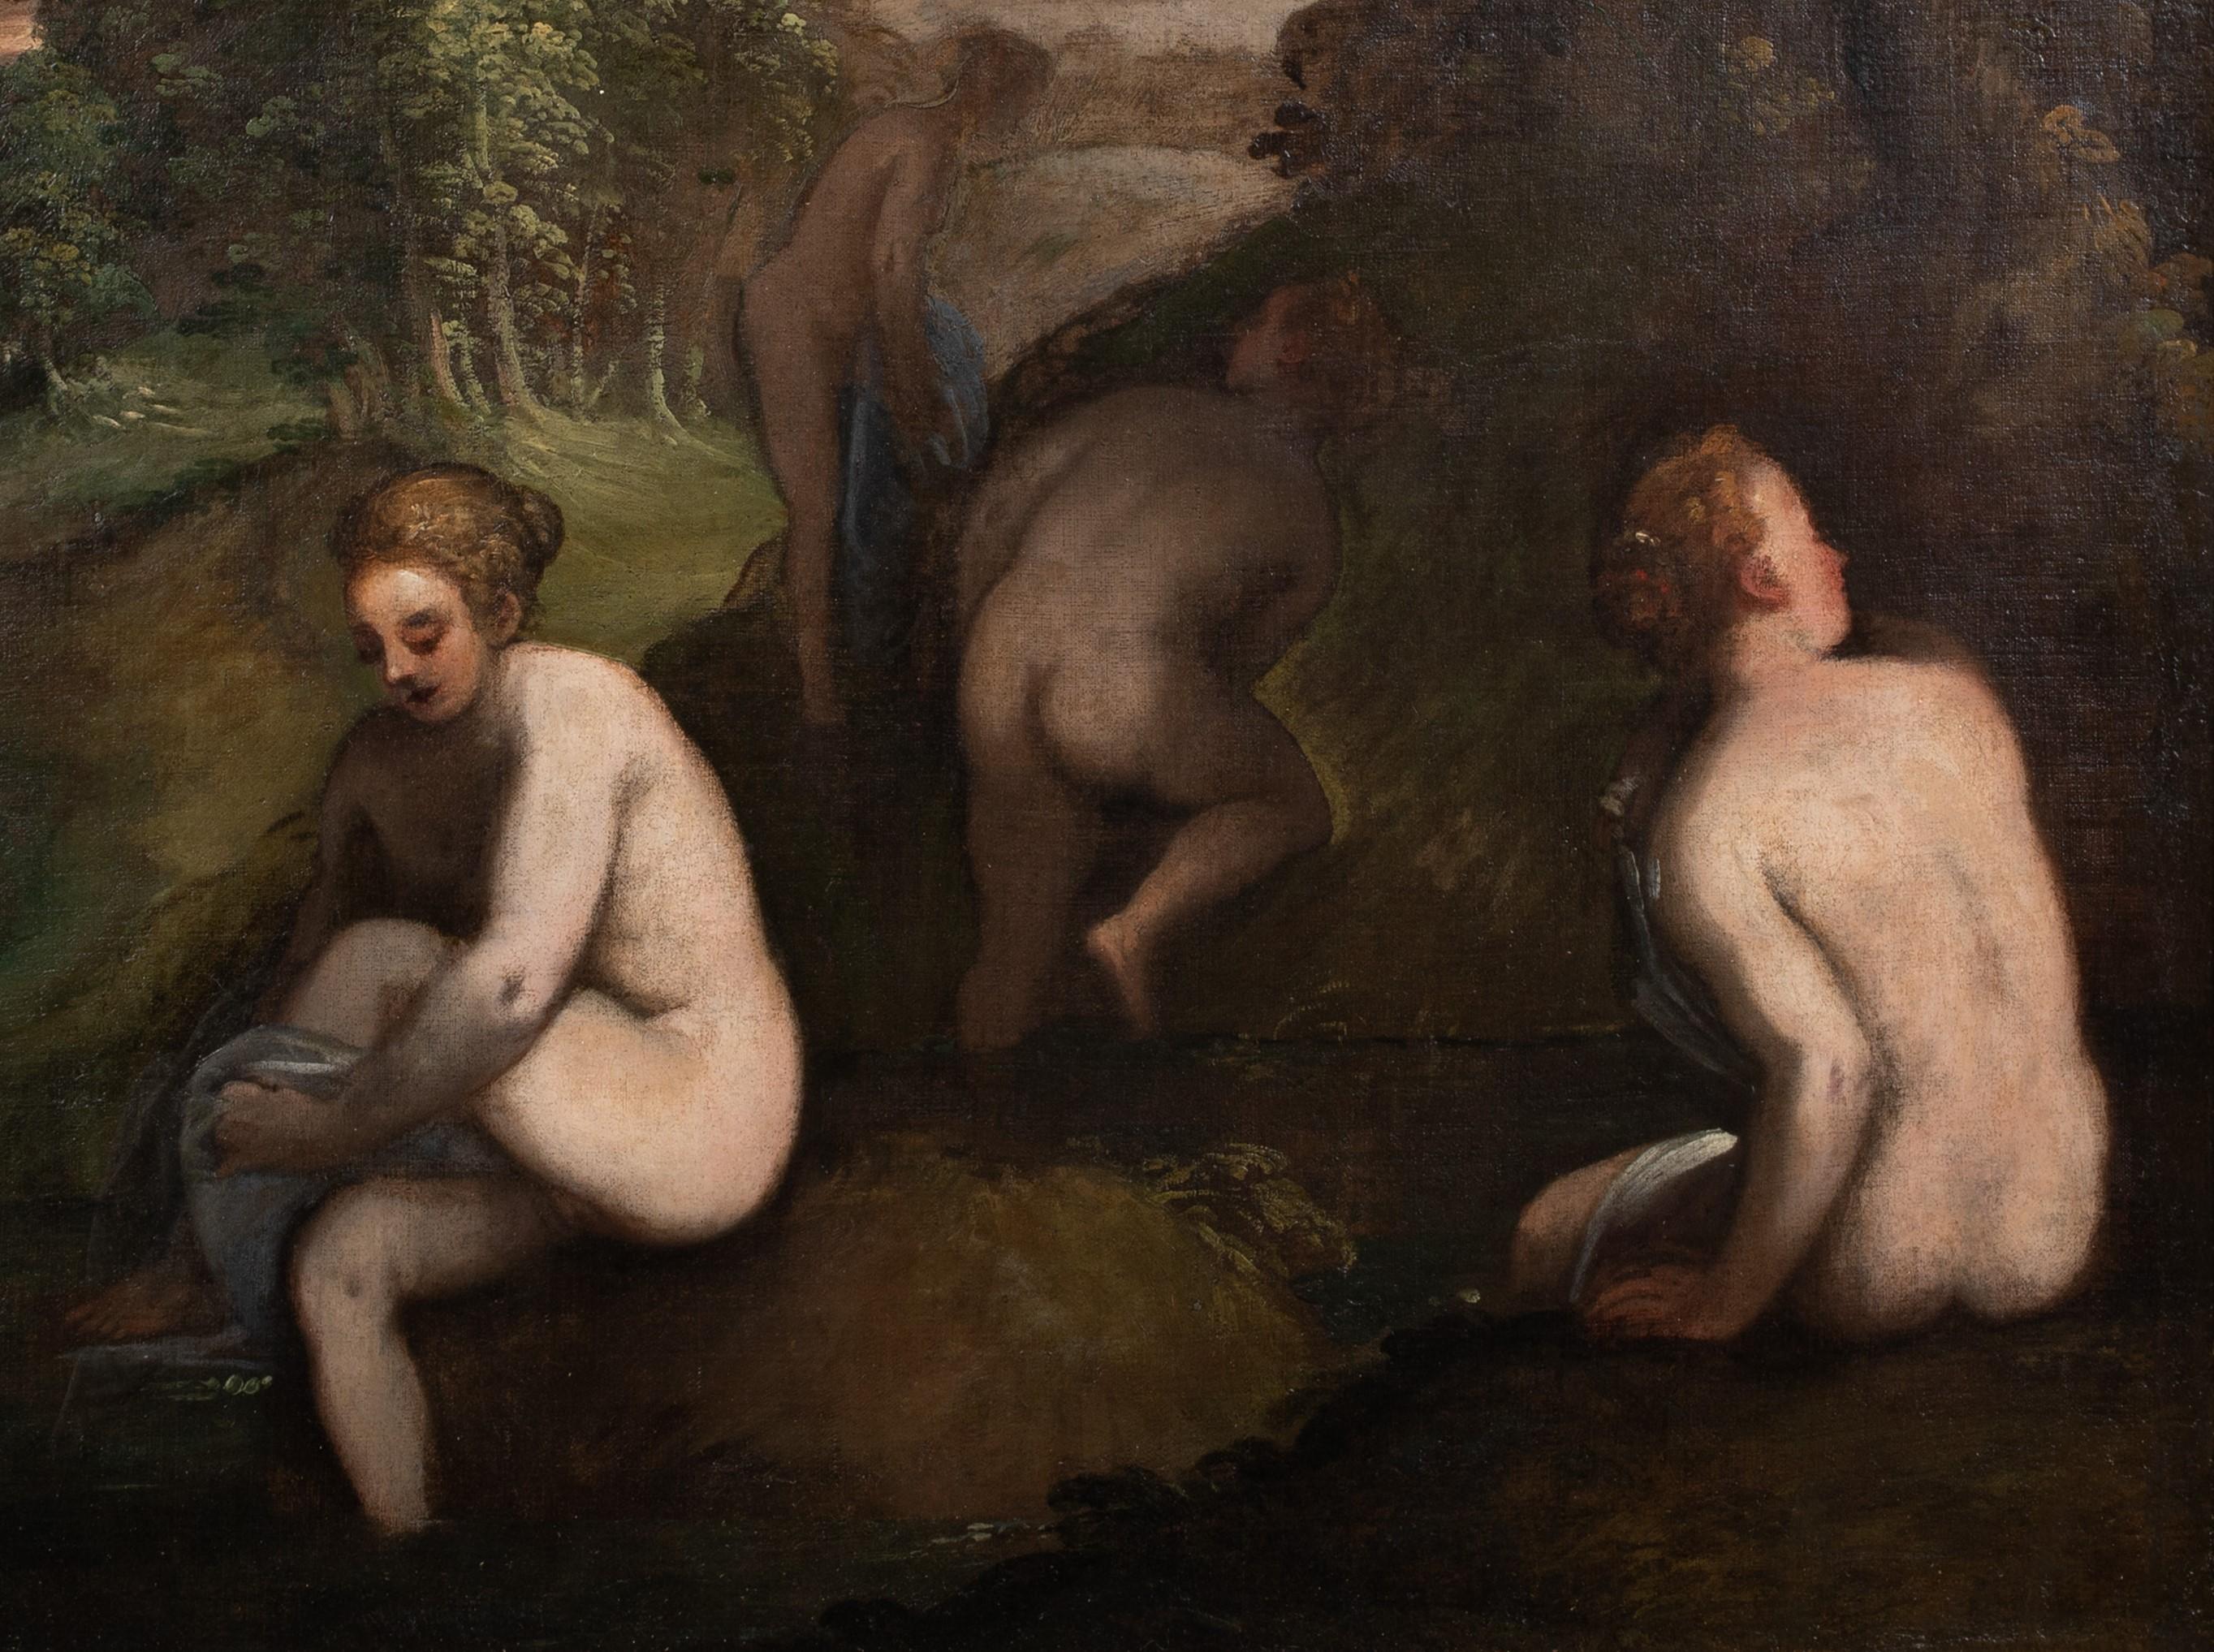 Nude bathing in A Landscape, 16th/17th Century

Italian / Flemish School

Huge 16th 17th century Italian Flemish School landscape with nude bathers, oil on canvas. Excellent quality and condition circa 1600 extensive landscape with the nudes /